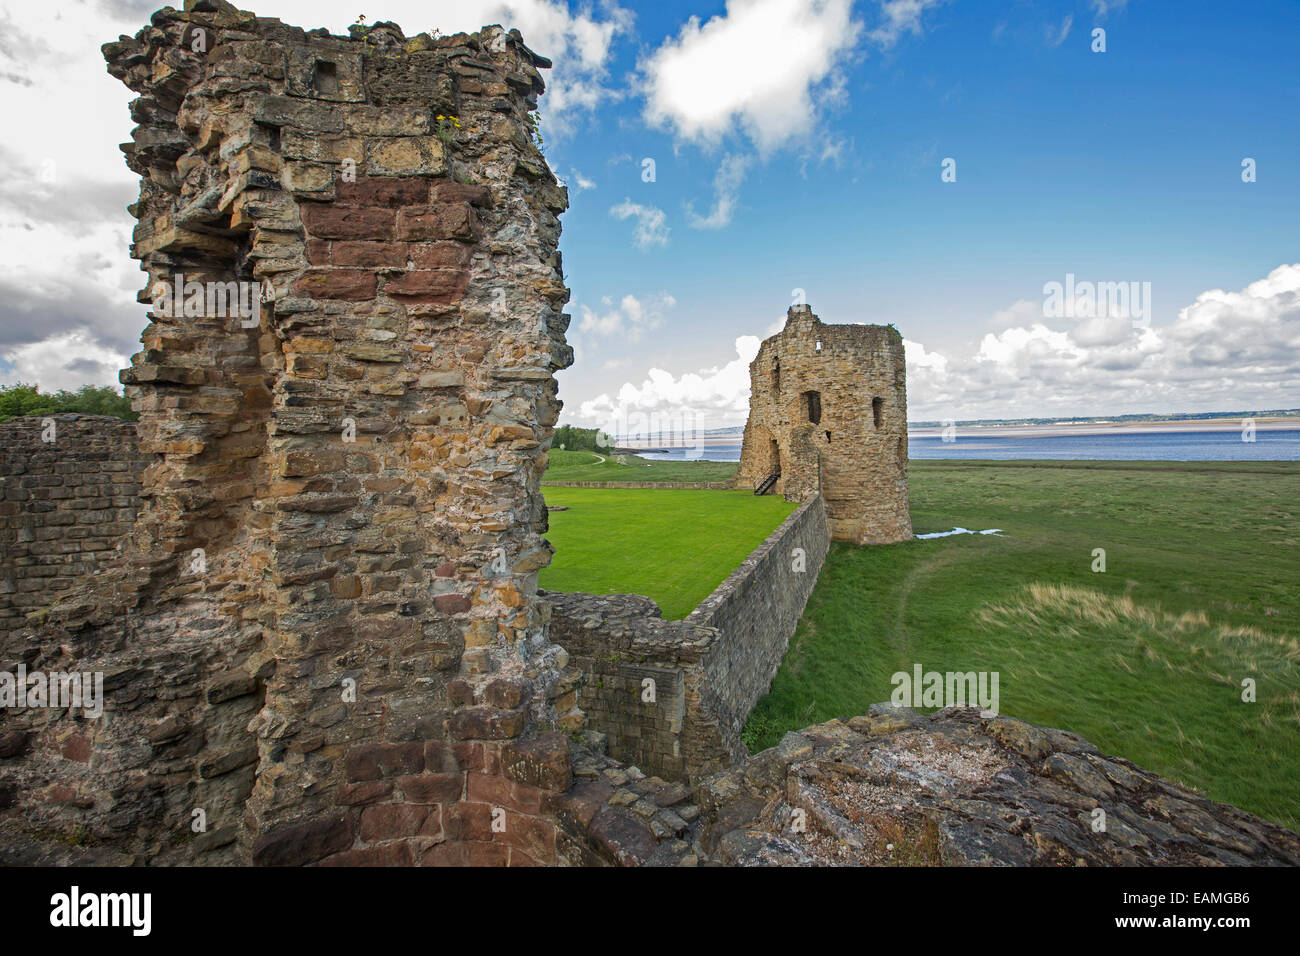 Ruins of 13th century Flint castle on edge of  River Dee estuary under blue sky daubed with clouds in northern Wales Stock Photo